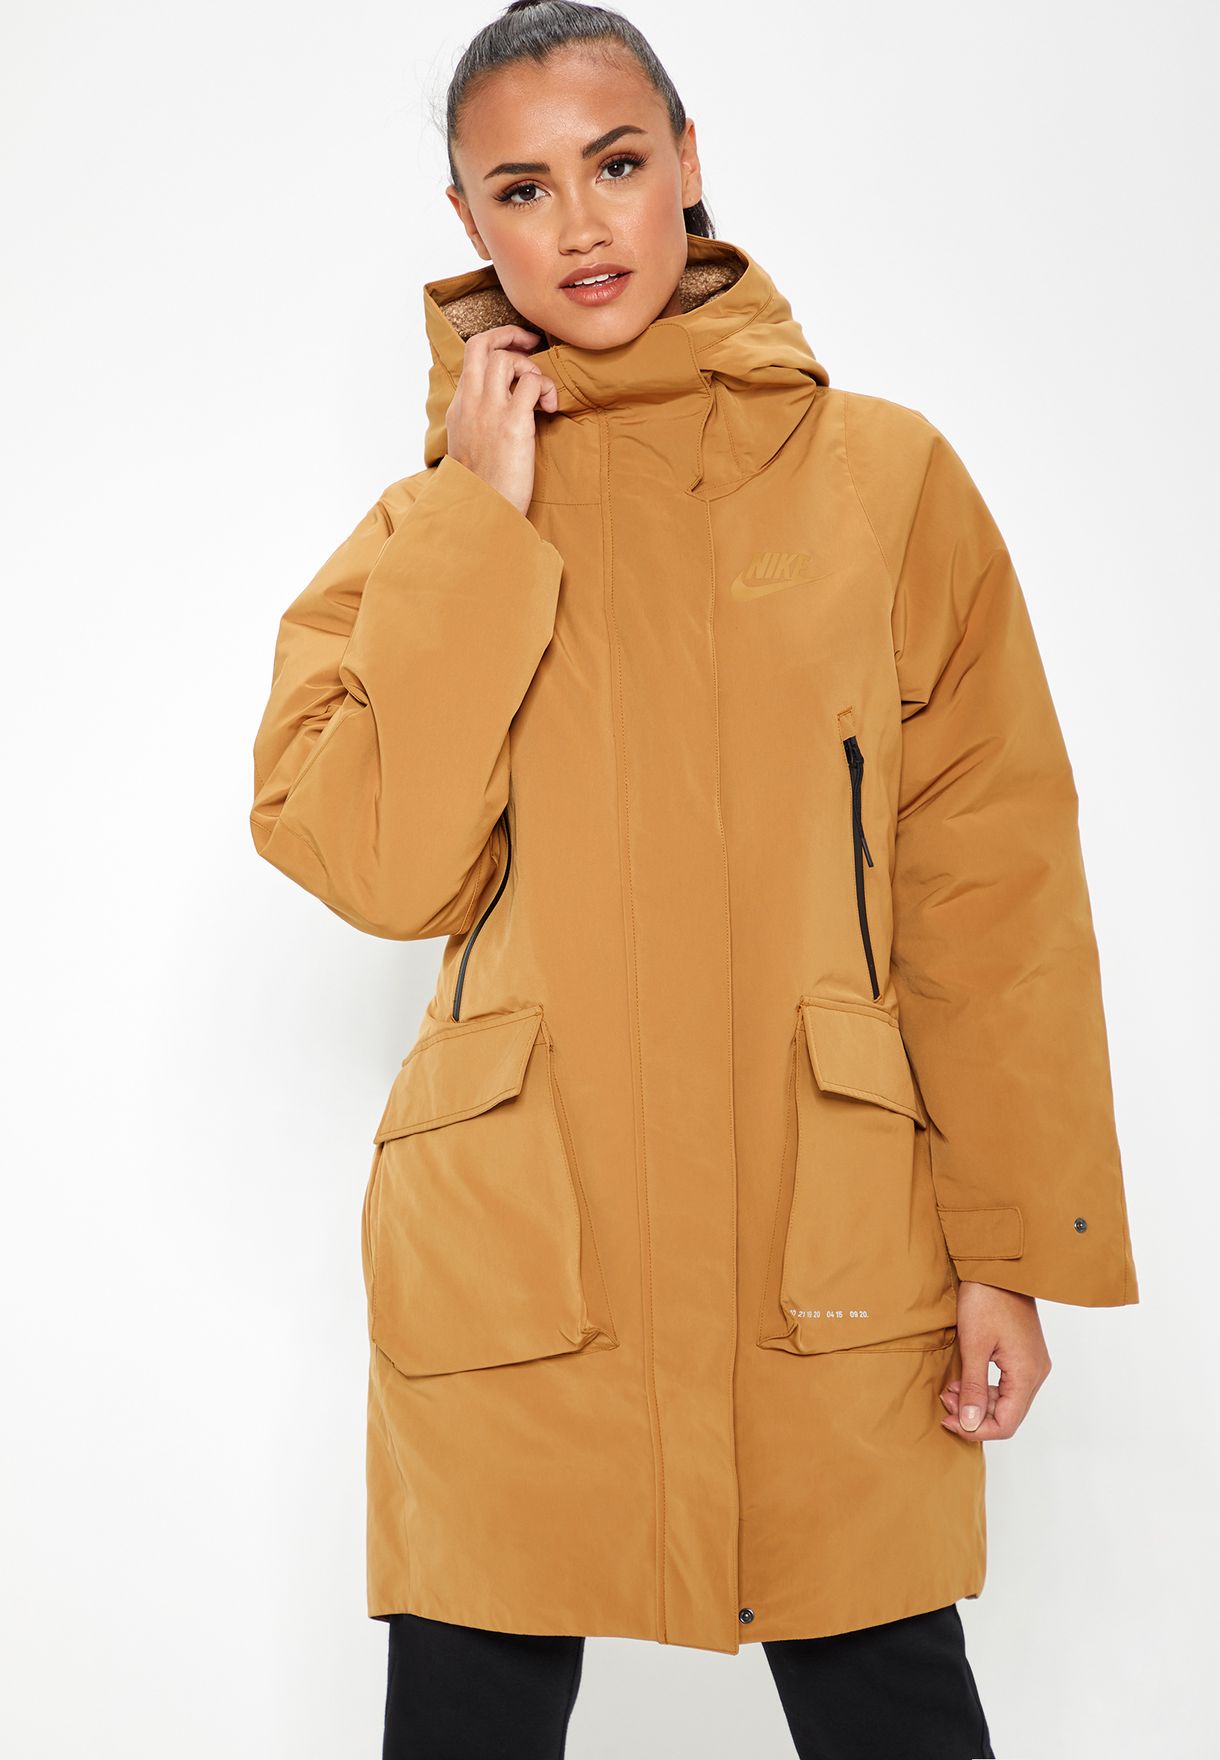 Nike Sportswear Tech Pack Down Fill Parka Hot Sale, UP TO 66% OFF 